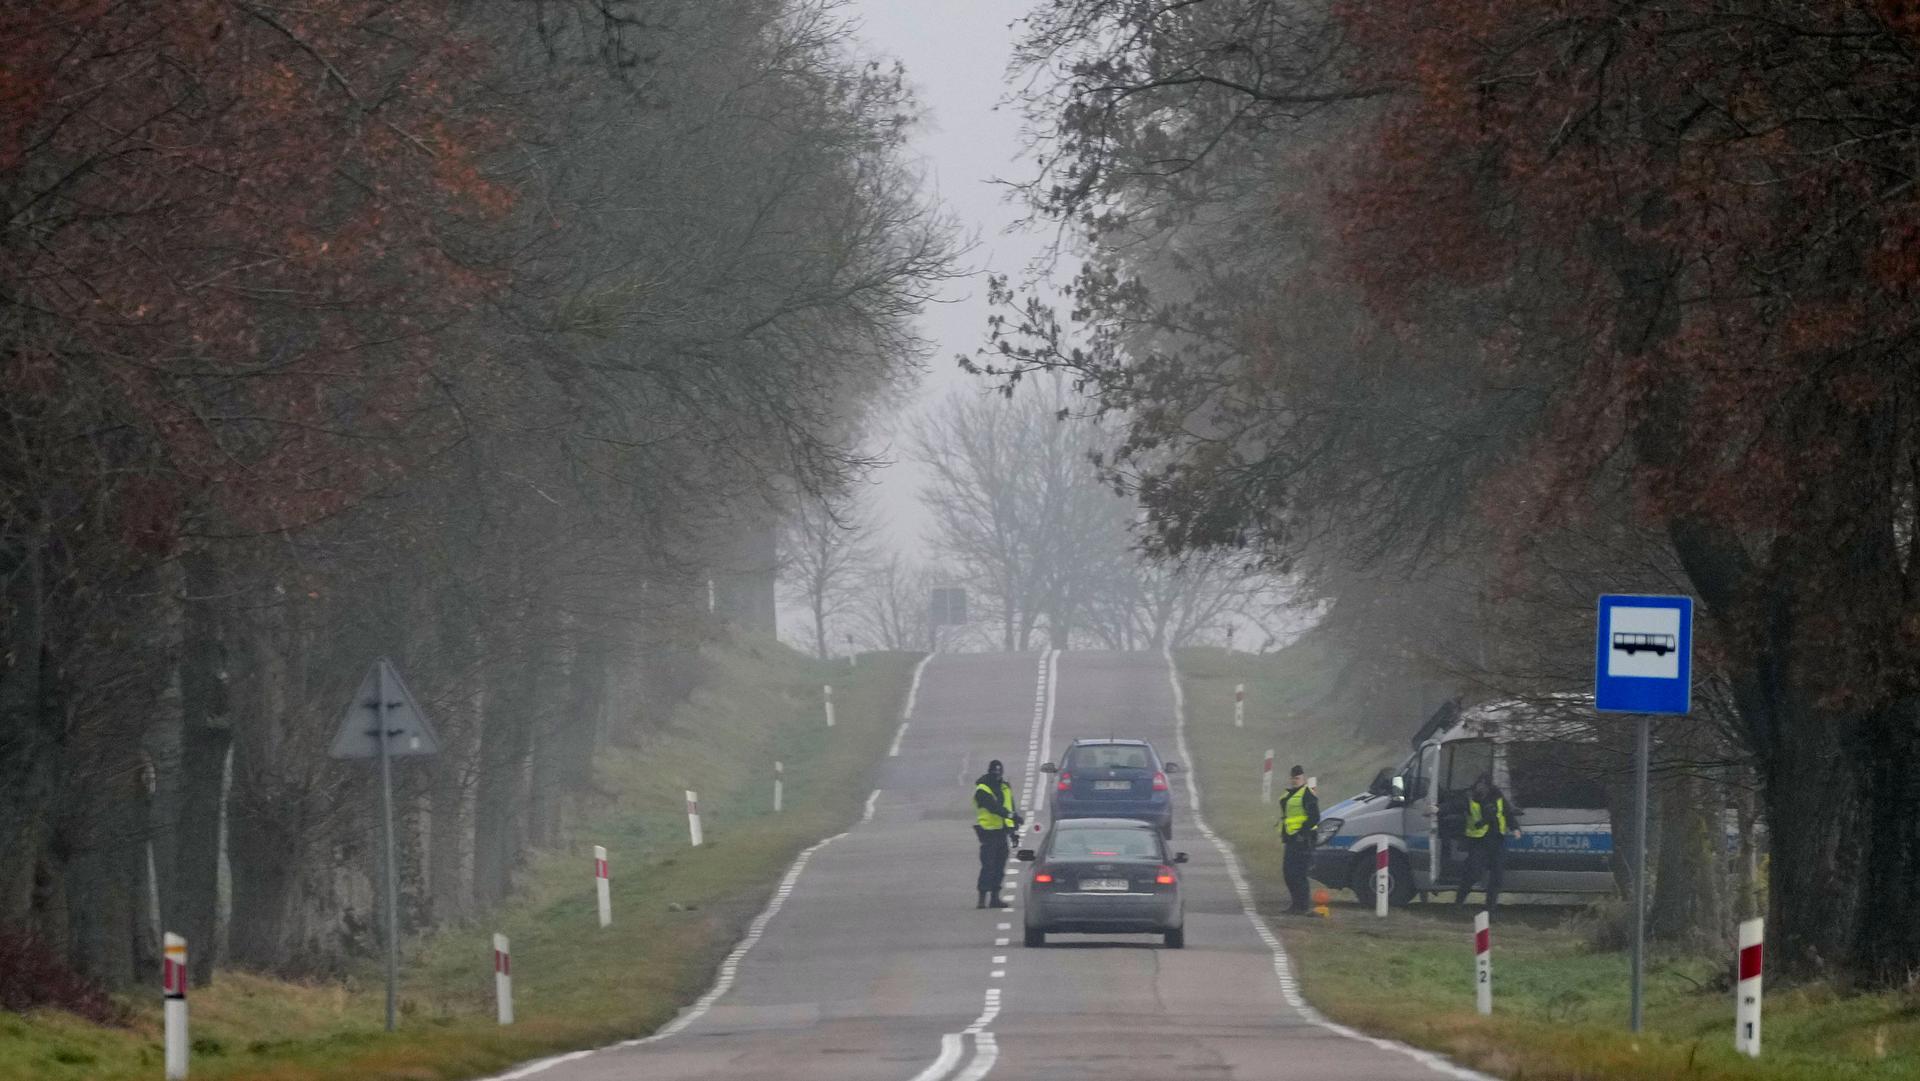 Polish police officers check cars near the border to Belarus, that was closed because of a large group of migrants camping in the area on the Belarus side who had tried to push their way into Poland and into the European Union, in Kuznica, Poland, Thursda